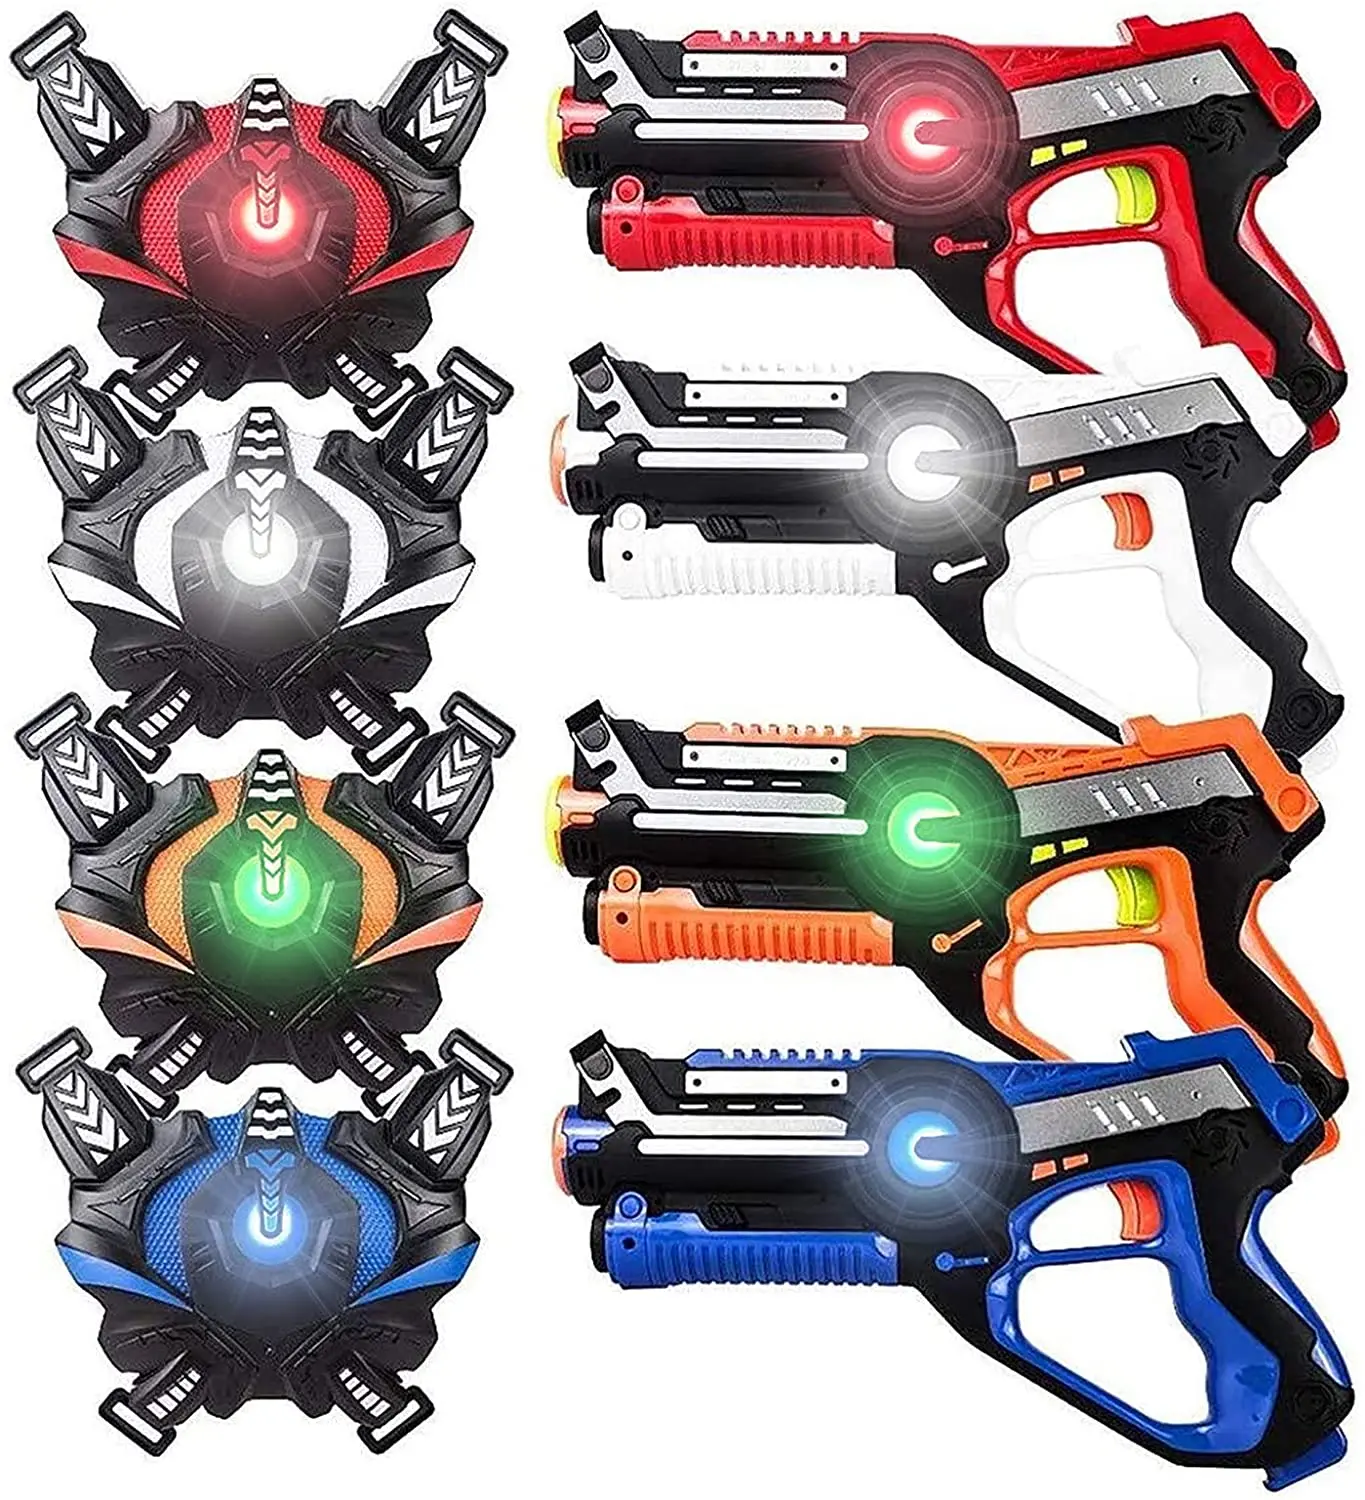 Large Laser Tag Guns Sets with Vest Infrared Laser Tag Guns Toys for Kids Adults Indoor Outdoor Group Activity Blaster Boys Girl gatlings electric gel ball blaster rechargeable automatic airsoft pistol for adults kids splatter toy gun with water beads